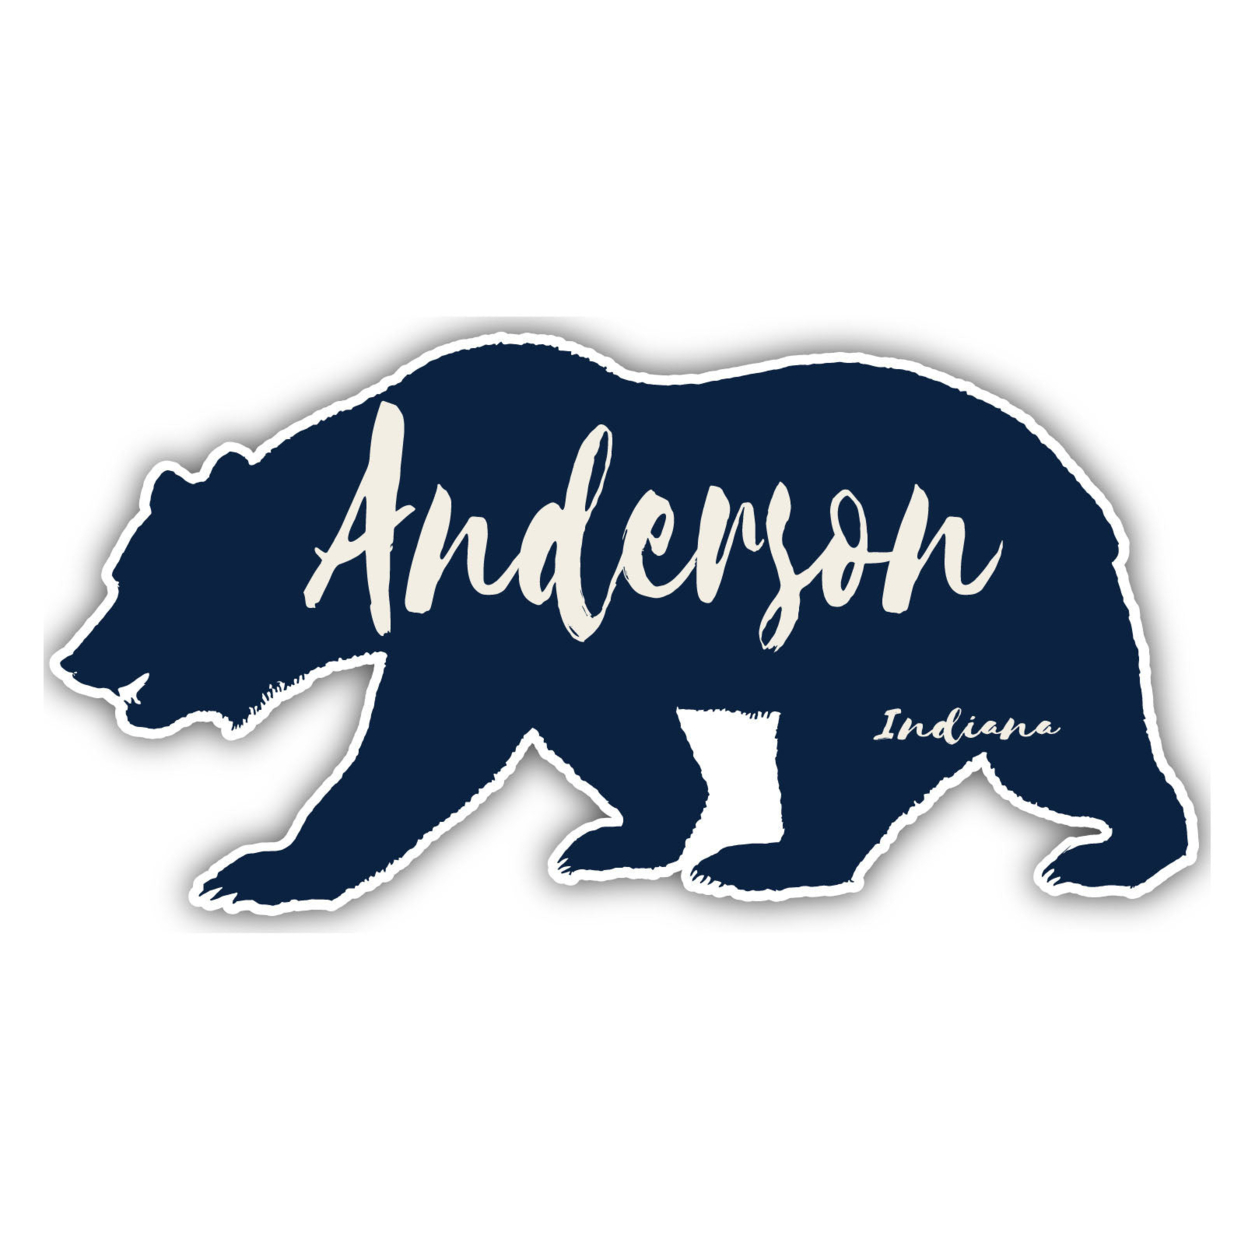 Anderson Indiana Souvenir Decorative Stickers (Choose Theme And Size) - 4-Pack, 12-Inch, Bear